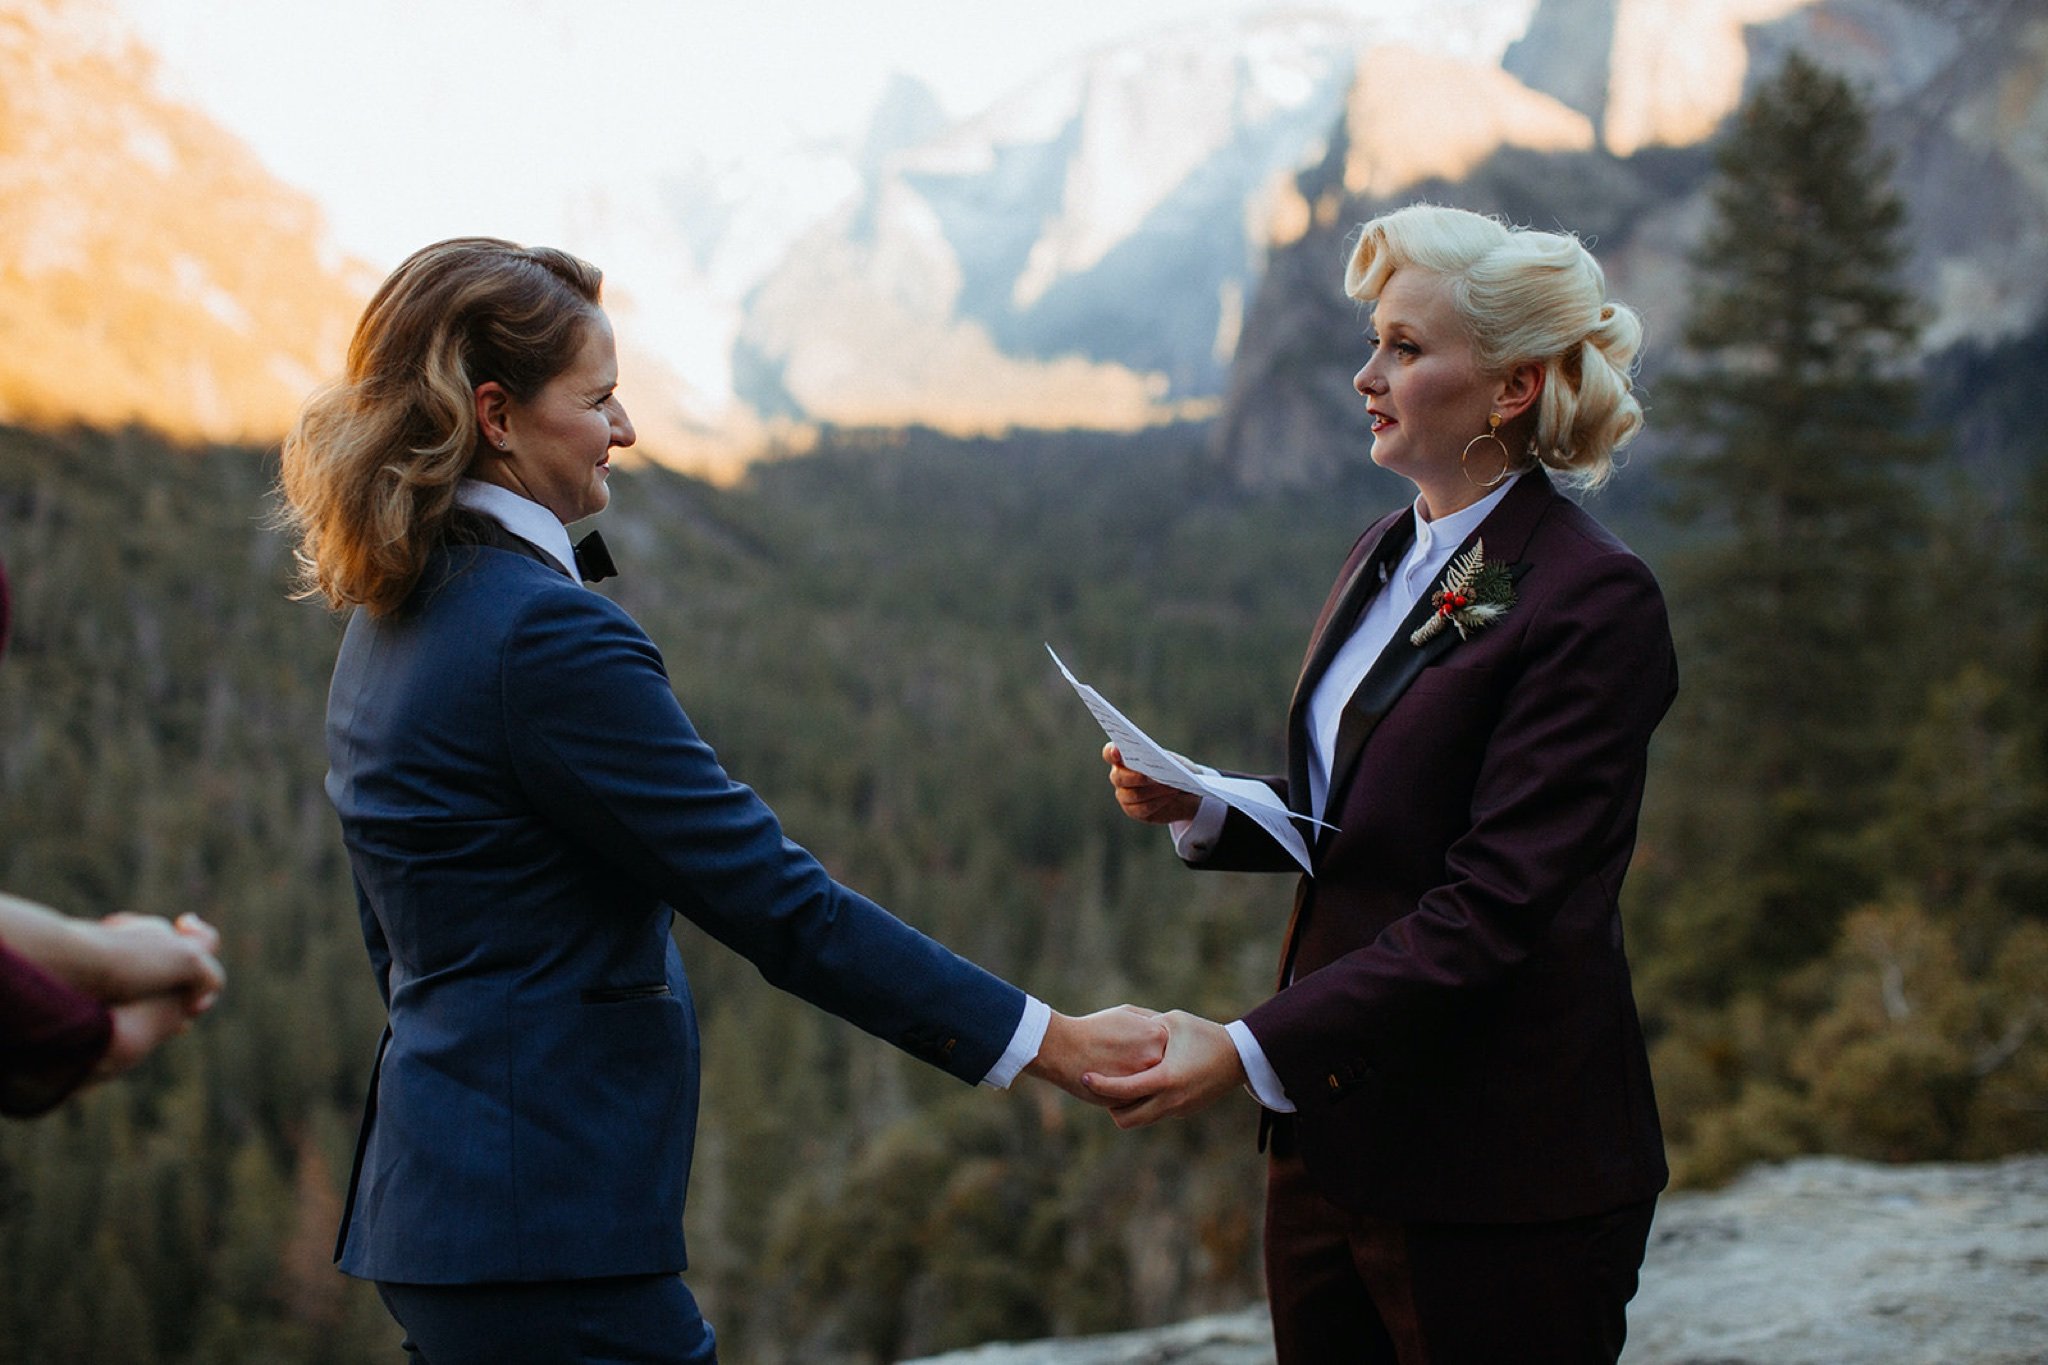 LGBT-Yosemite-National-Park-Elopement-with-Two-Brides-Will-Khoury-Elopement-Photographer_39.jpg